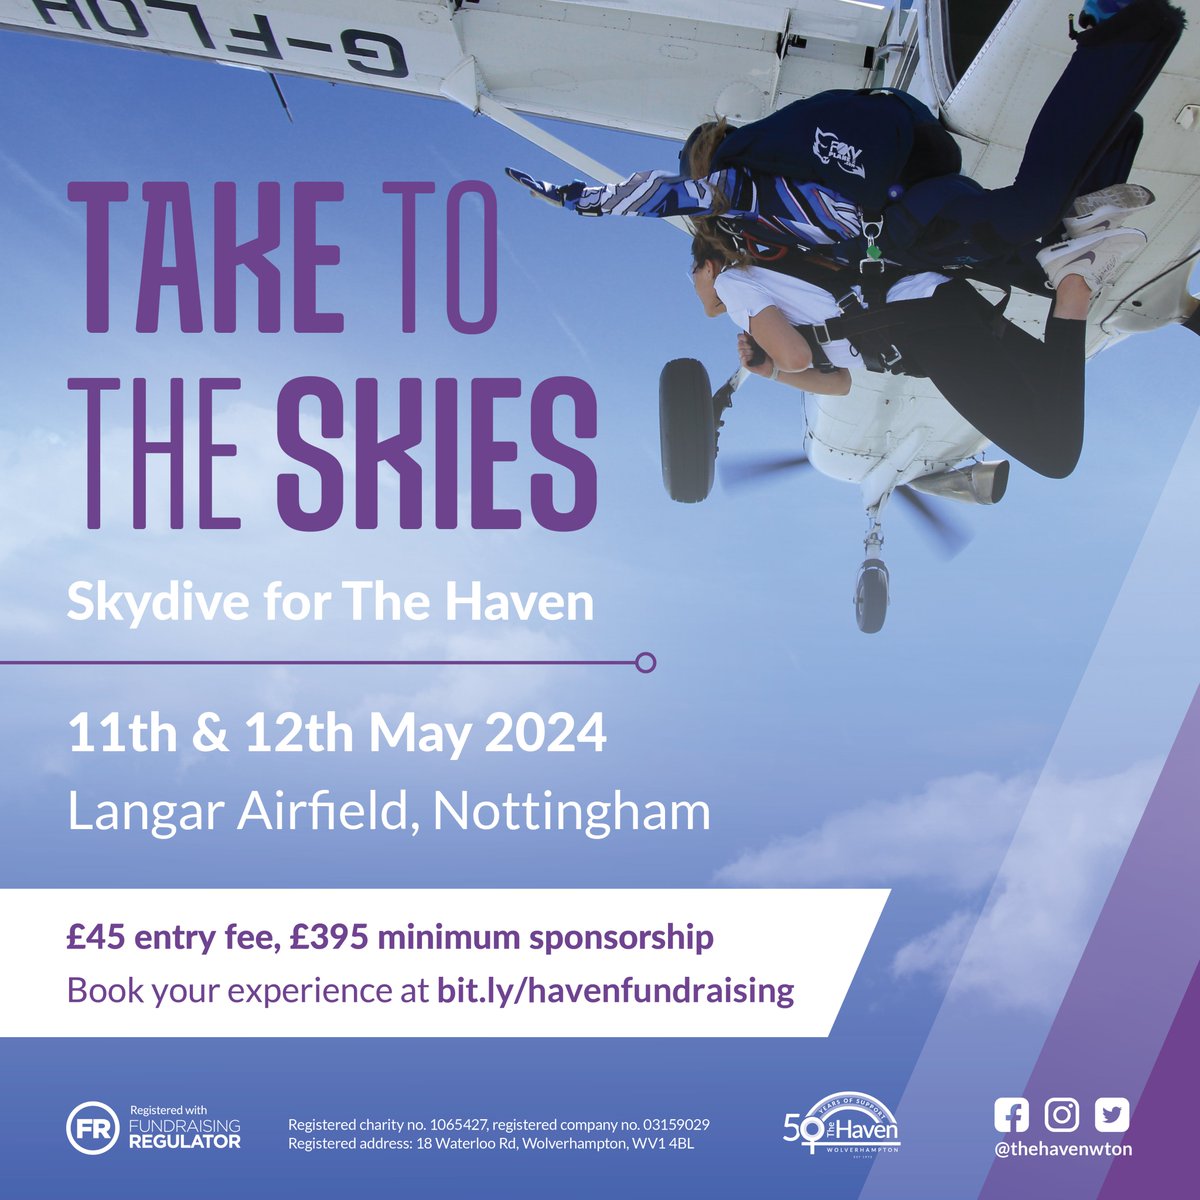 Ready to Take to the Skies? Join our fearless team for the ultimate skydiving challenge at Langar Airfield, Nottingham - May 2024! #TakeToTheSkies #SkydiveForACause #AdrenalineJunkiesUnite